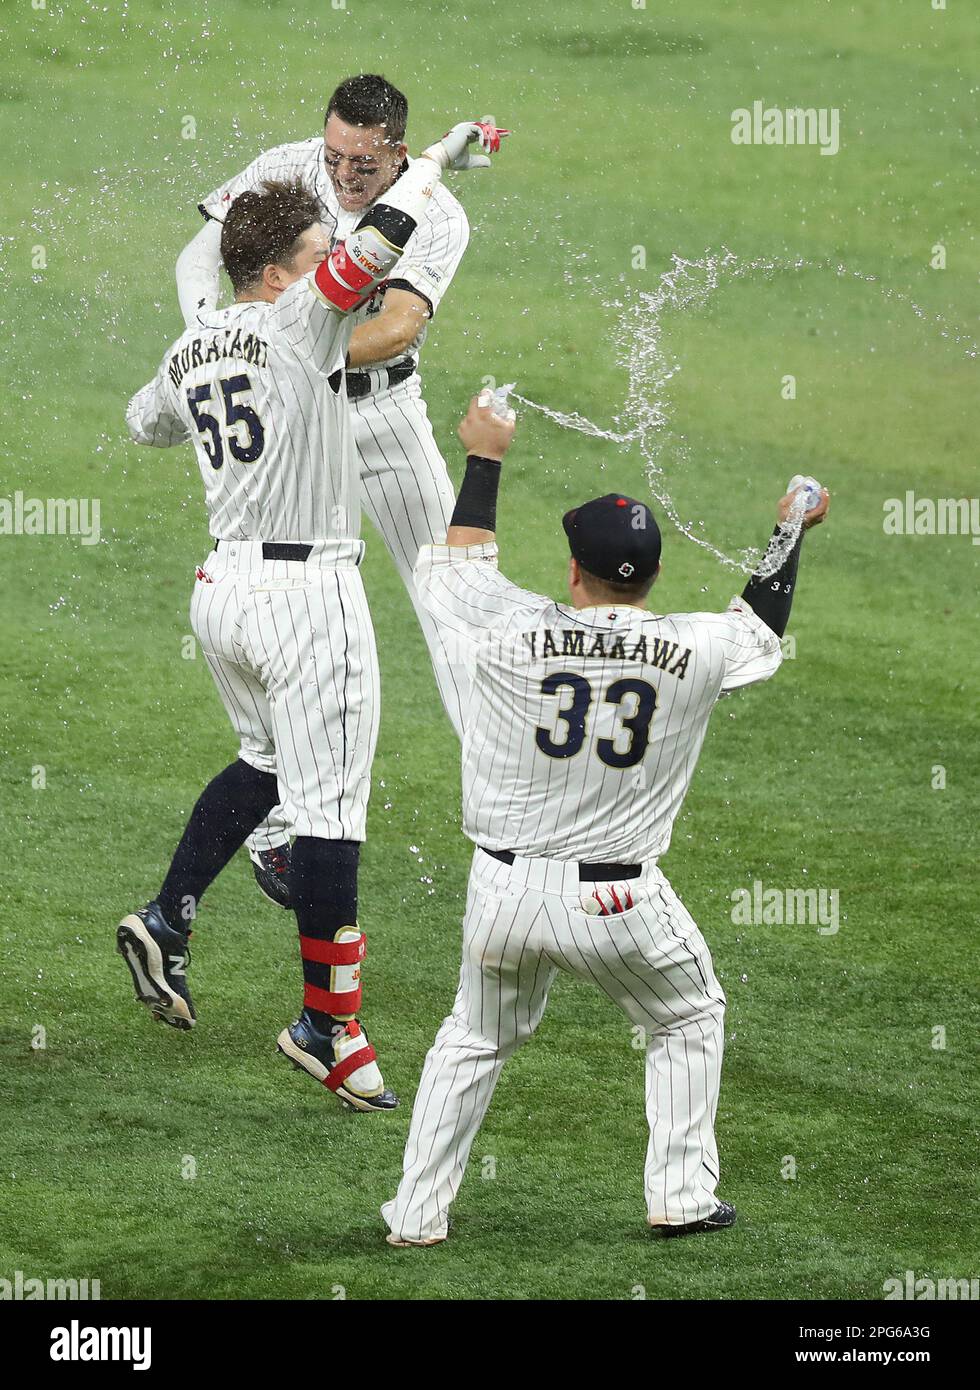 Miami, United States. 20th Mar, 2023. Japan's Munetaka Murakami (55) celebrates with Lars Nootbaar (23) and Hotaka Yamakawa (33) after hitting the game winning hit in the ninth inning of the 2023 World Baseball Classic semifinal game against Mexico in Miami, Florida on Monday, March 20, 2023. Photo by Aaron Josefczyk/UPI Credit: UPI/Alamy Live News Stock Photo